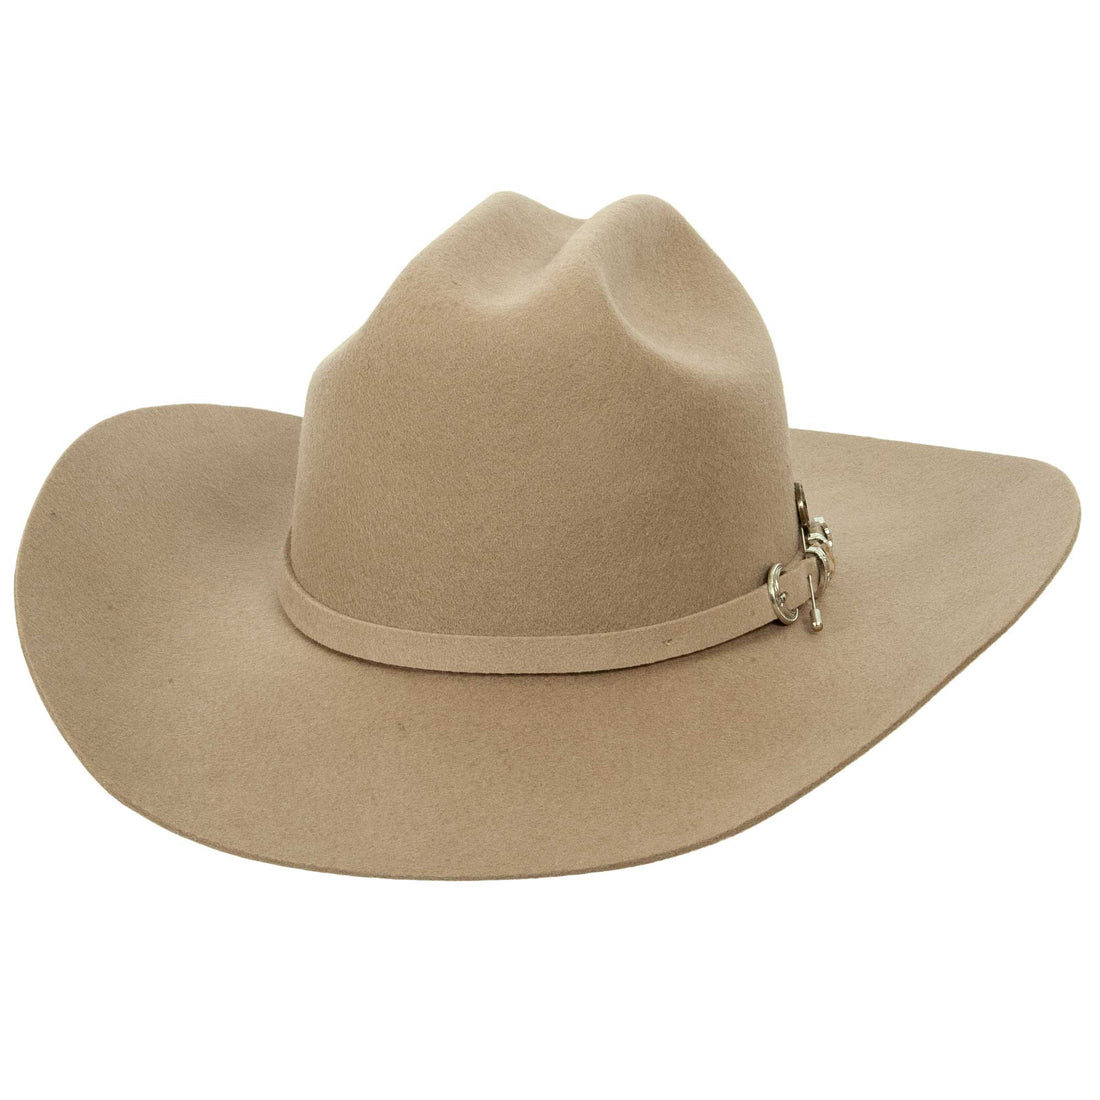 American Hat Makers Rodeo Horse Hair Hat Band – Coffman Tack